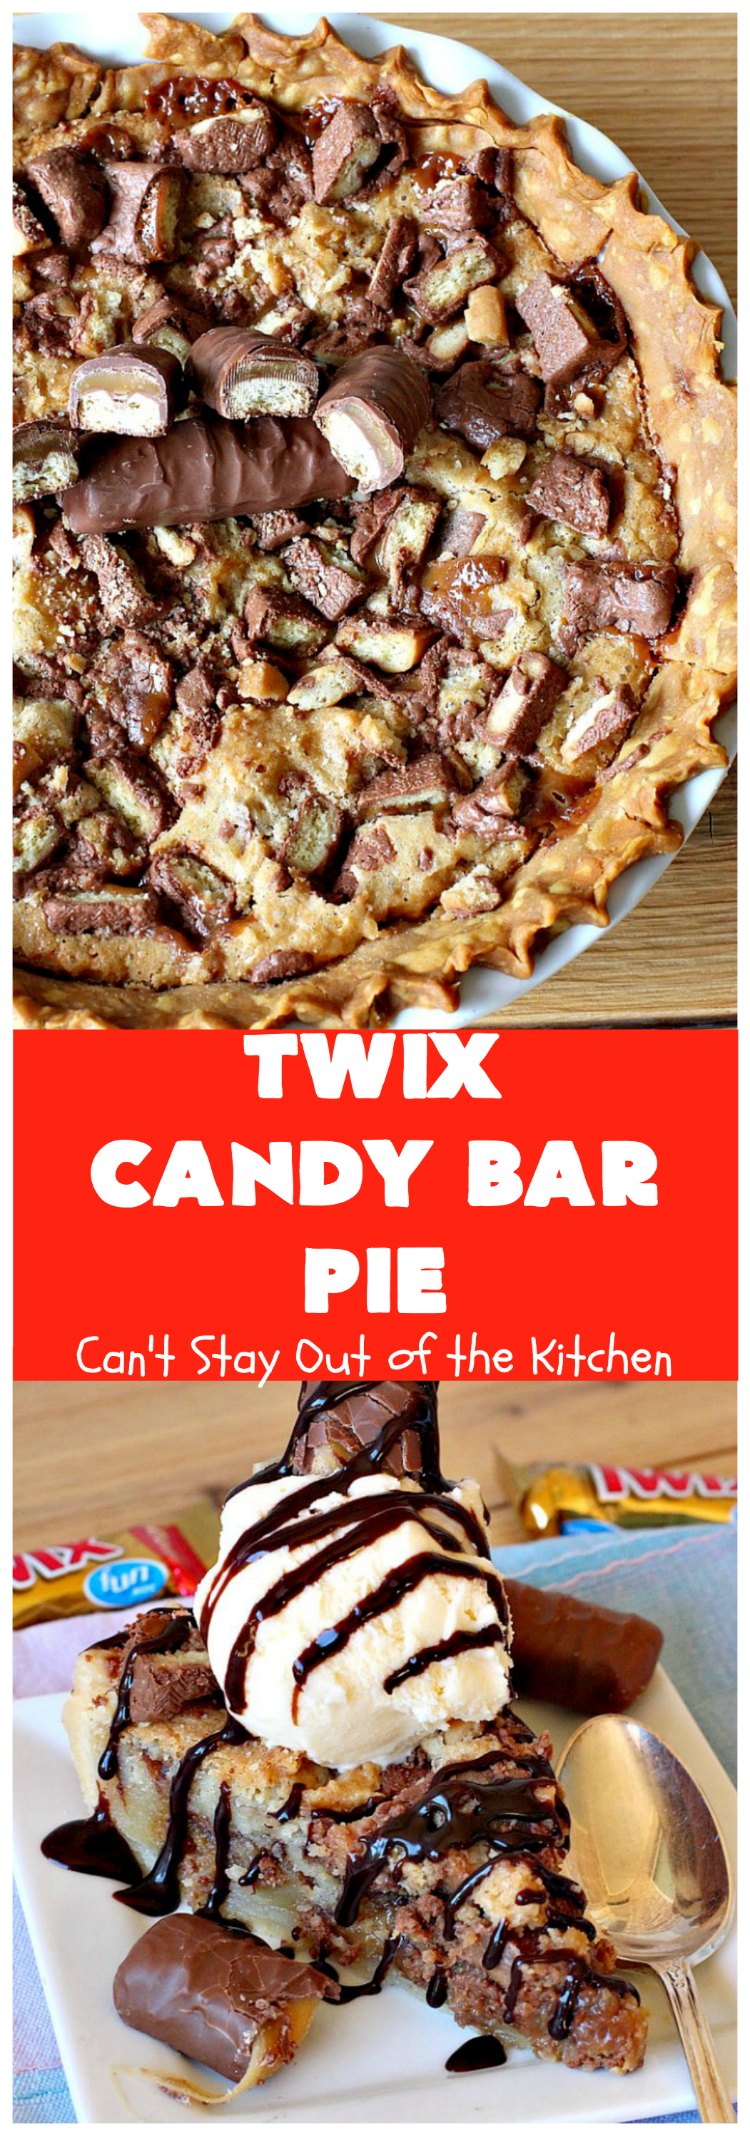 Twix Candy Bar Pie | Can't Stay Out of the Kitchen